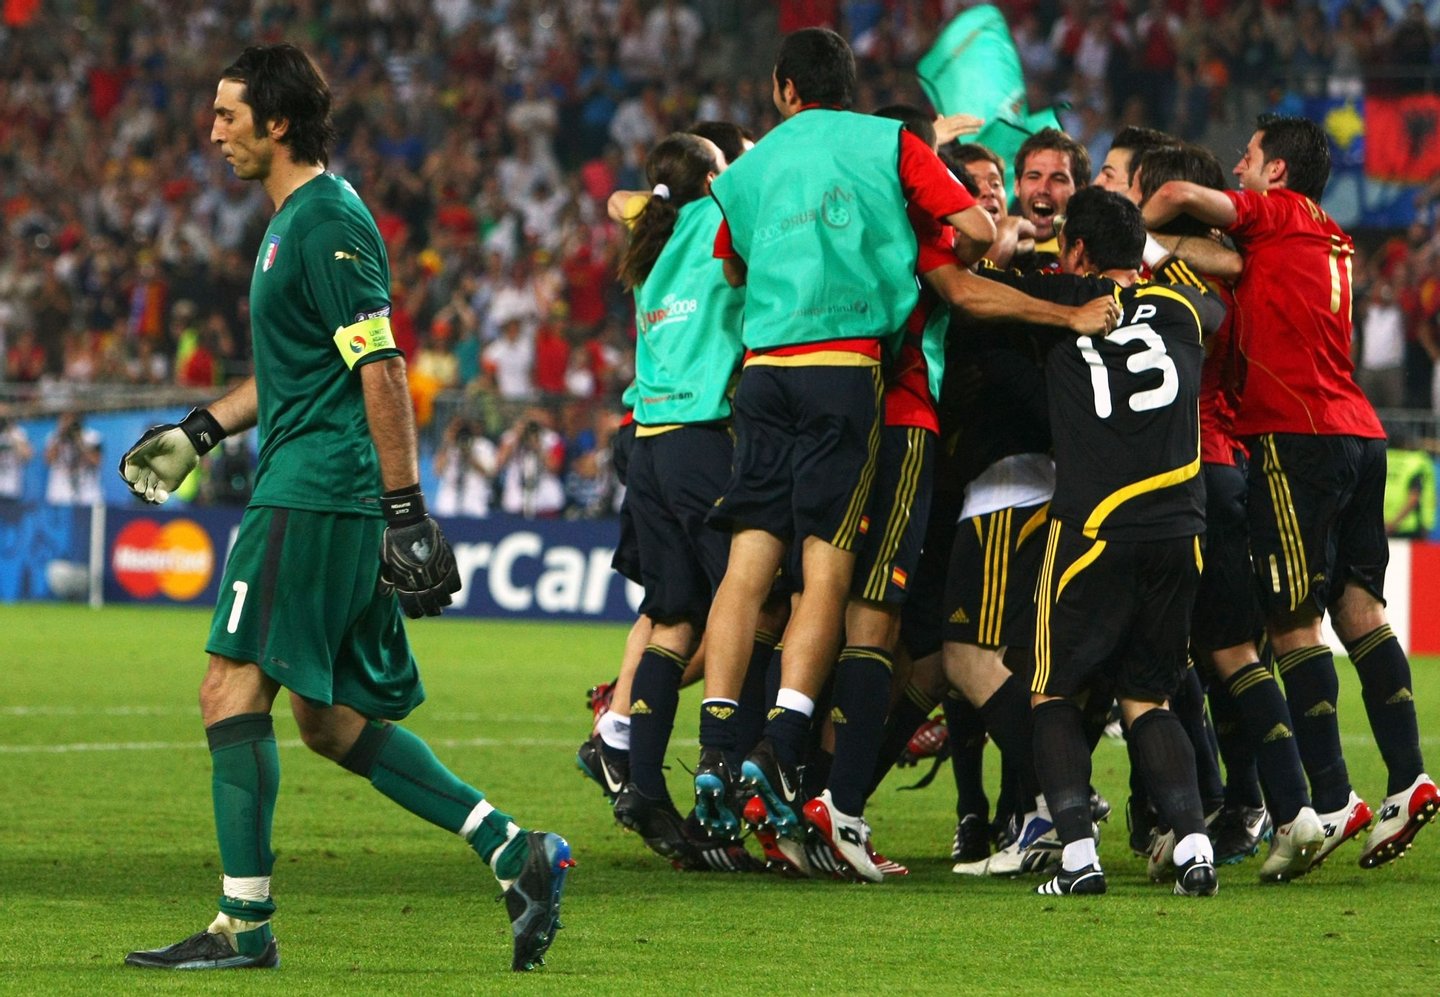 VIENNA, AUSTRIA - JUNE 22: Gianluigi Buffon (L) of Italy walks off dejected as Spanish players celebrate after Cesc Fabregas of Spain shoots and scores the winning penalty in the shoot out during the UEFA EURO 2008 Quarter Final match between Spain and Italy at Ernst Happel Stadion on June 22, 2008 in Vienna, Austria. (Photo by Clive Rose/Getty Images)